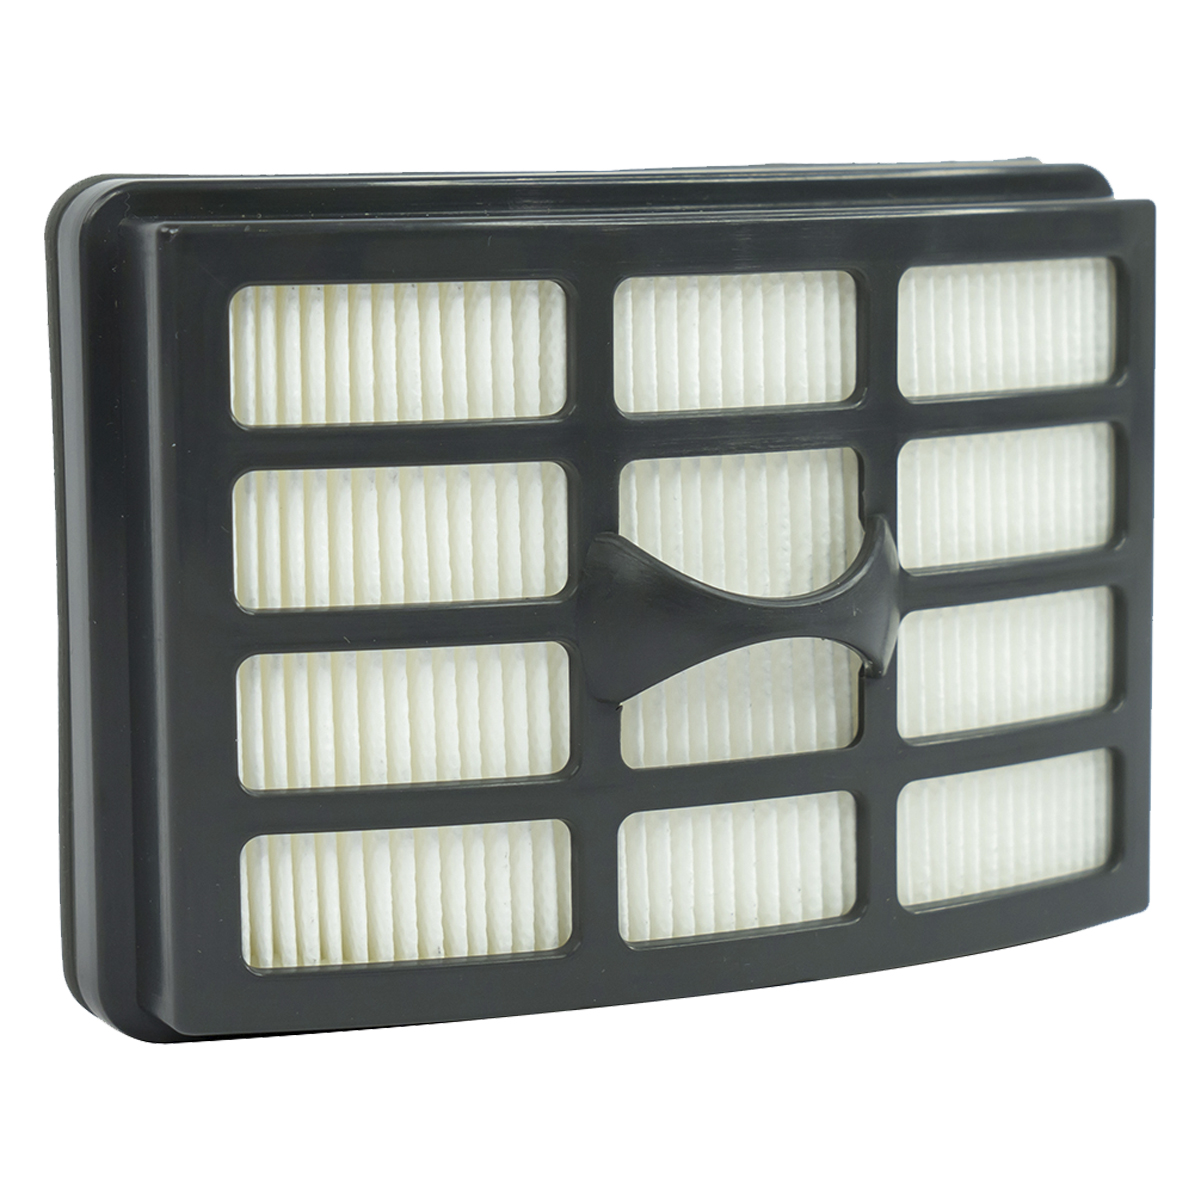 OEM Factory Vacuum Cleaner Hepa Air Filter Compatible With Sh ark NP318 NP319 NP320 LA400 XHF319 Vacuum Cleaner Parts